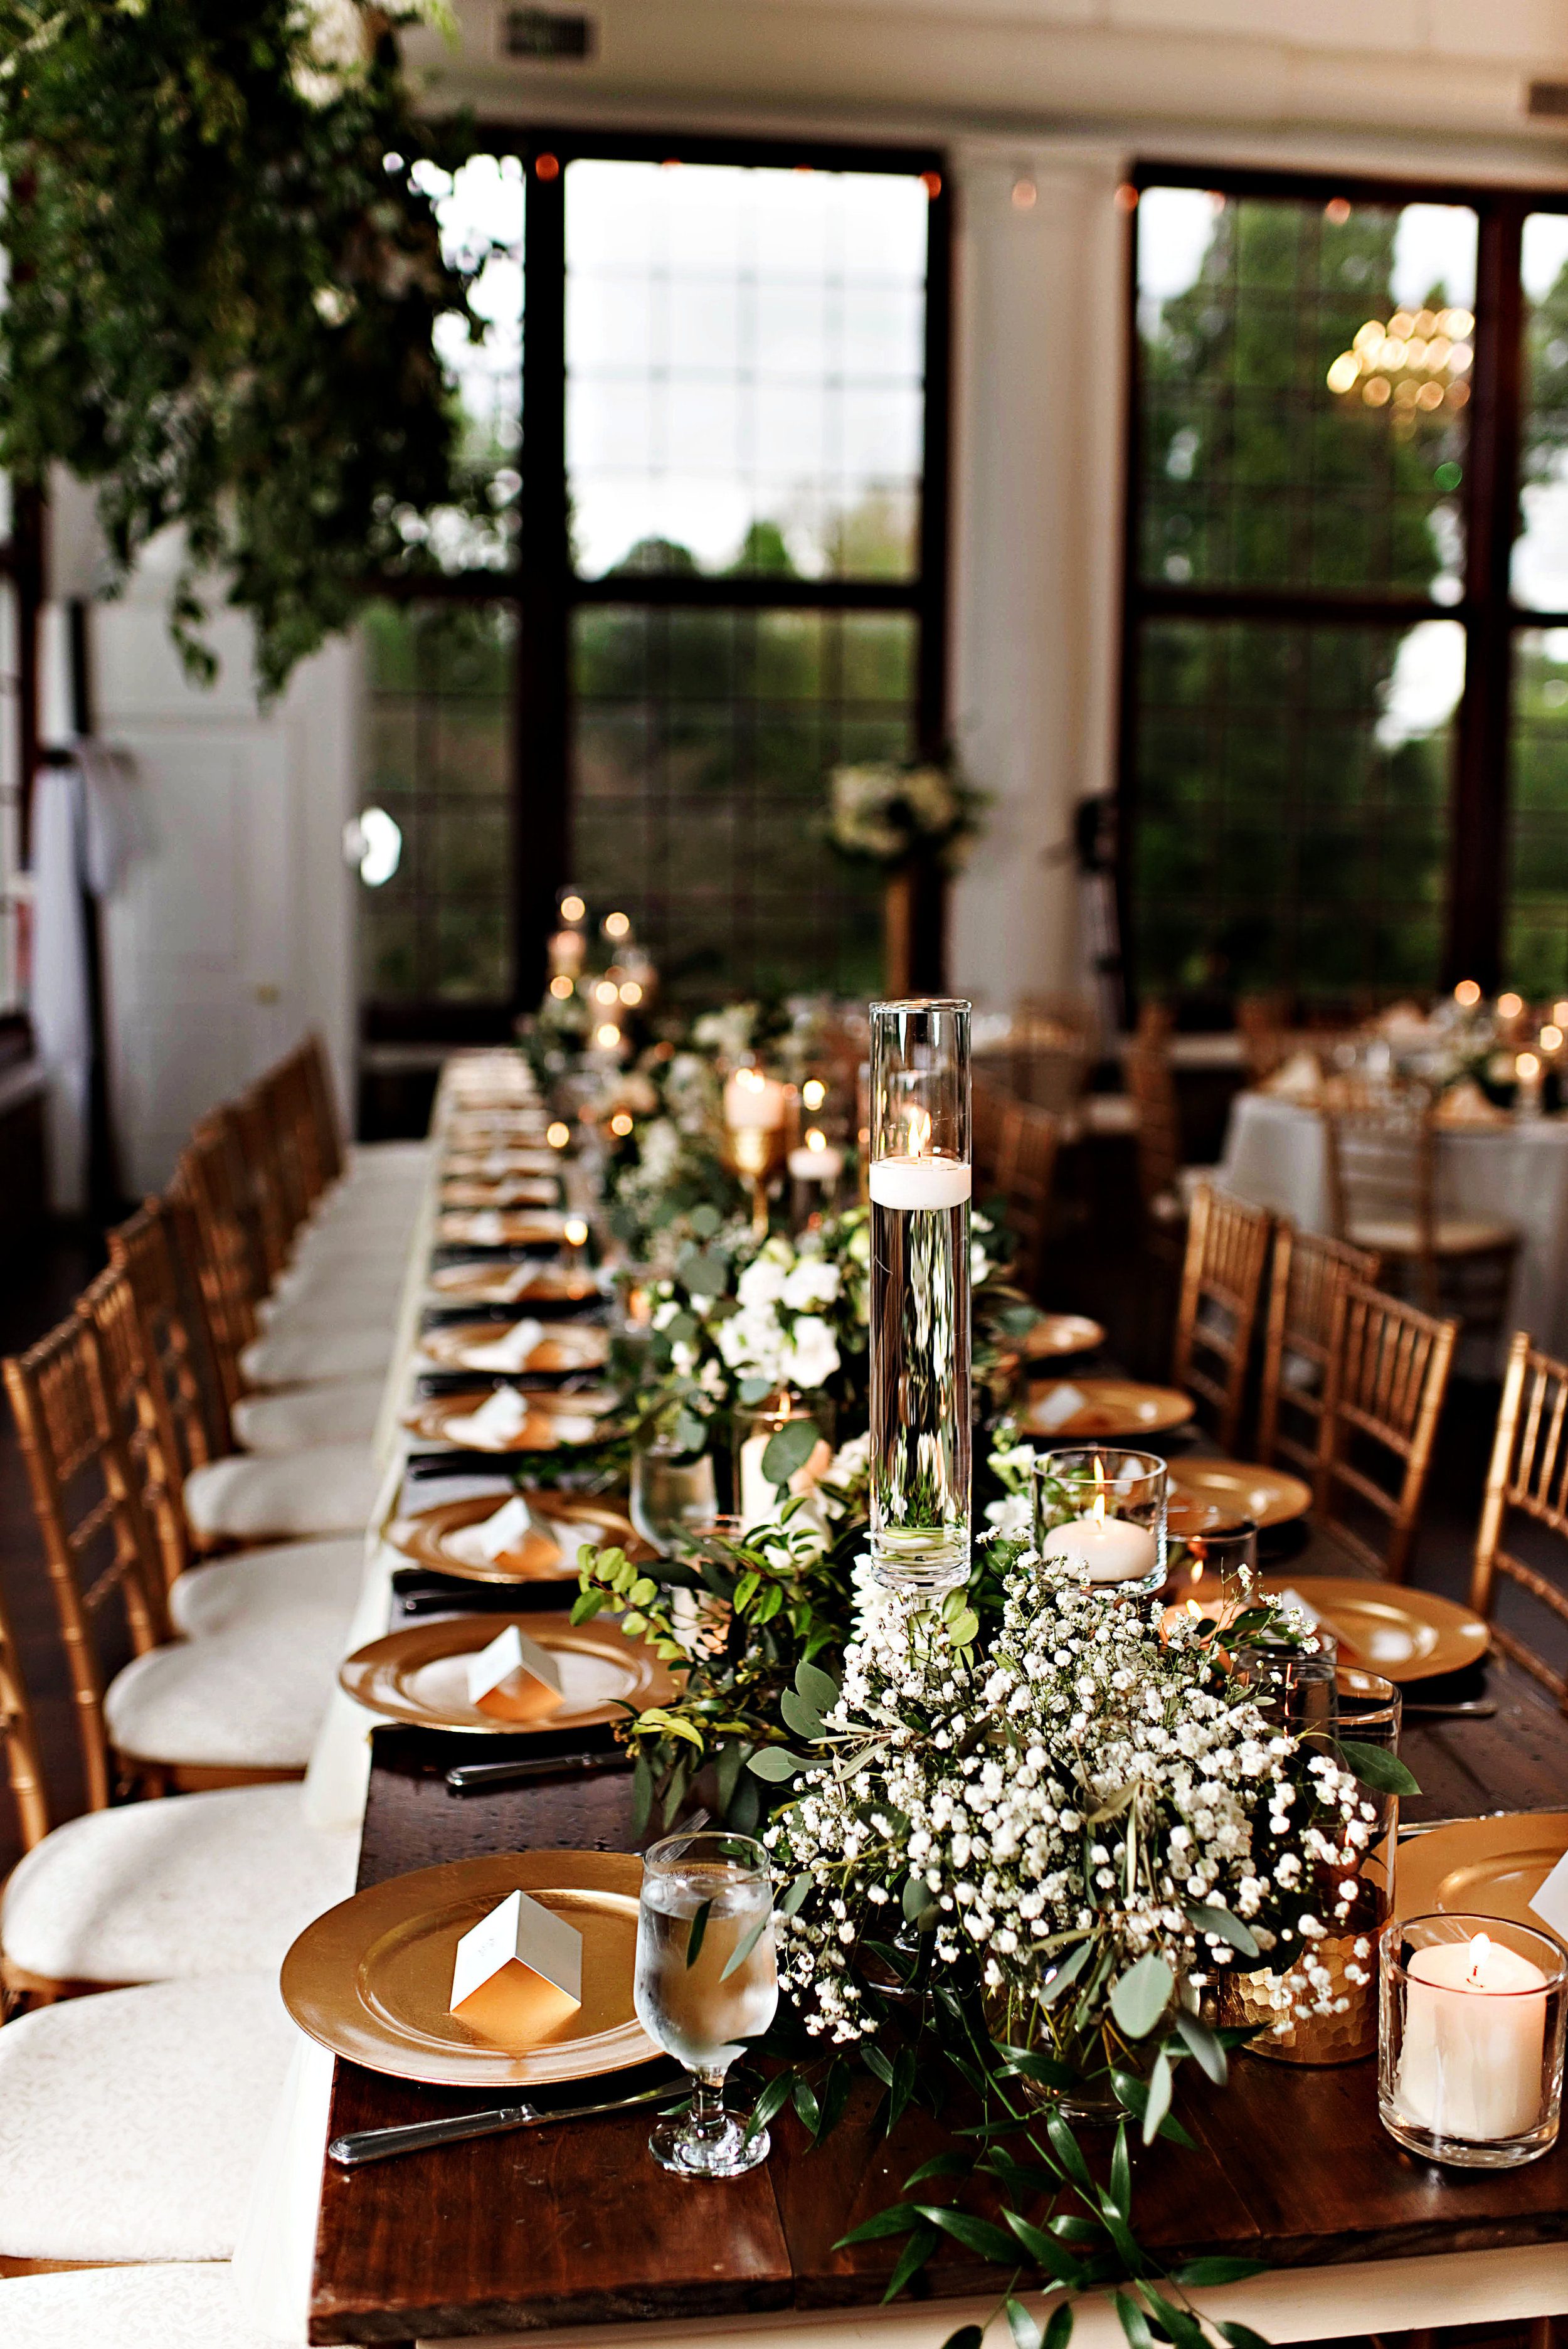 Head table featured vases of flowers and greens repurposed from the ceremony structure. The Photography Smiths.